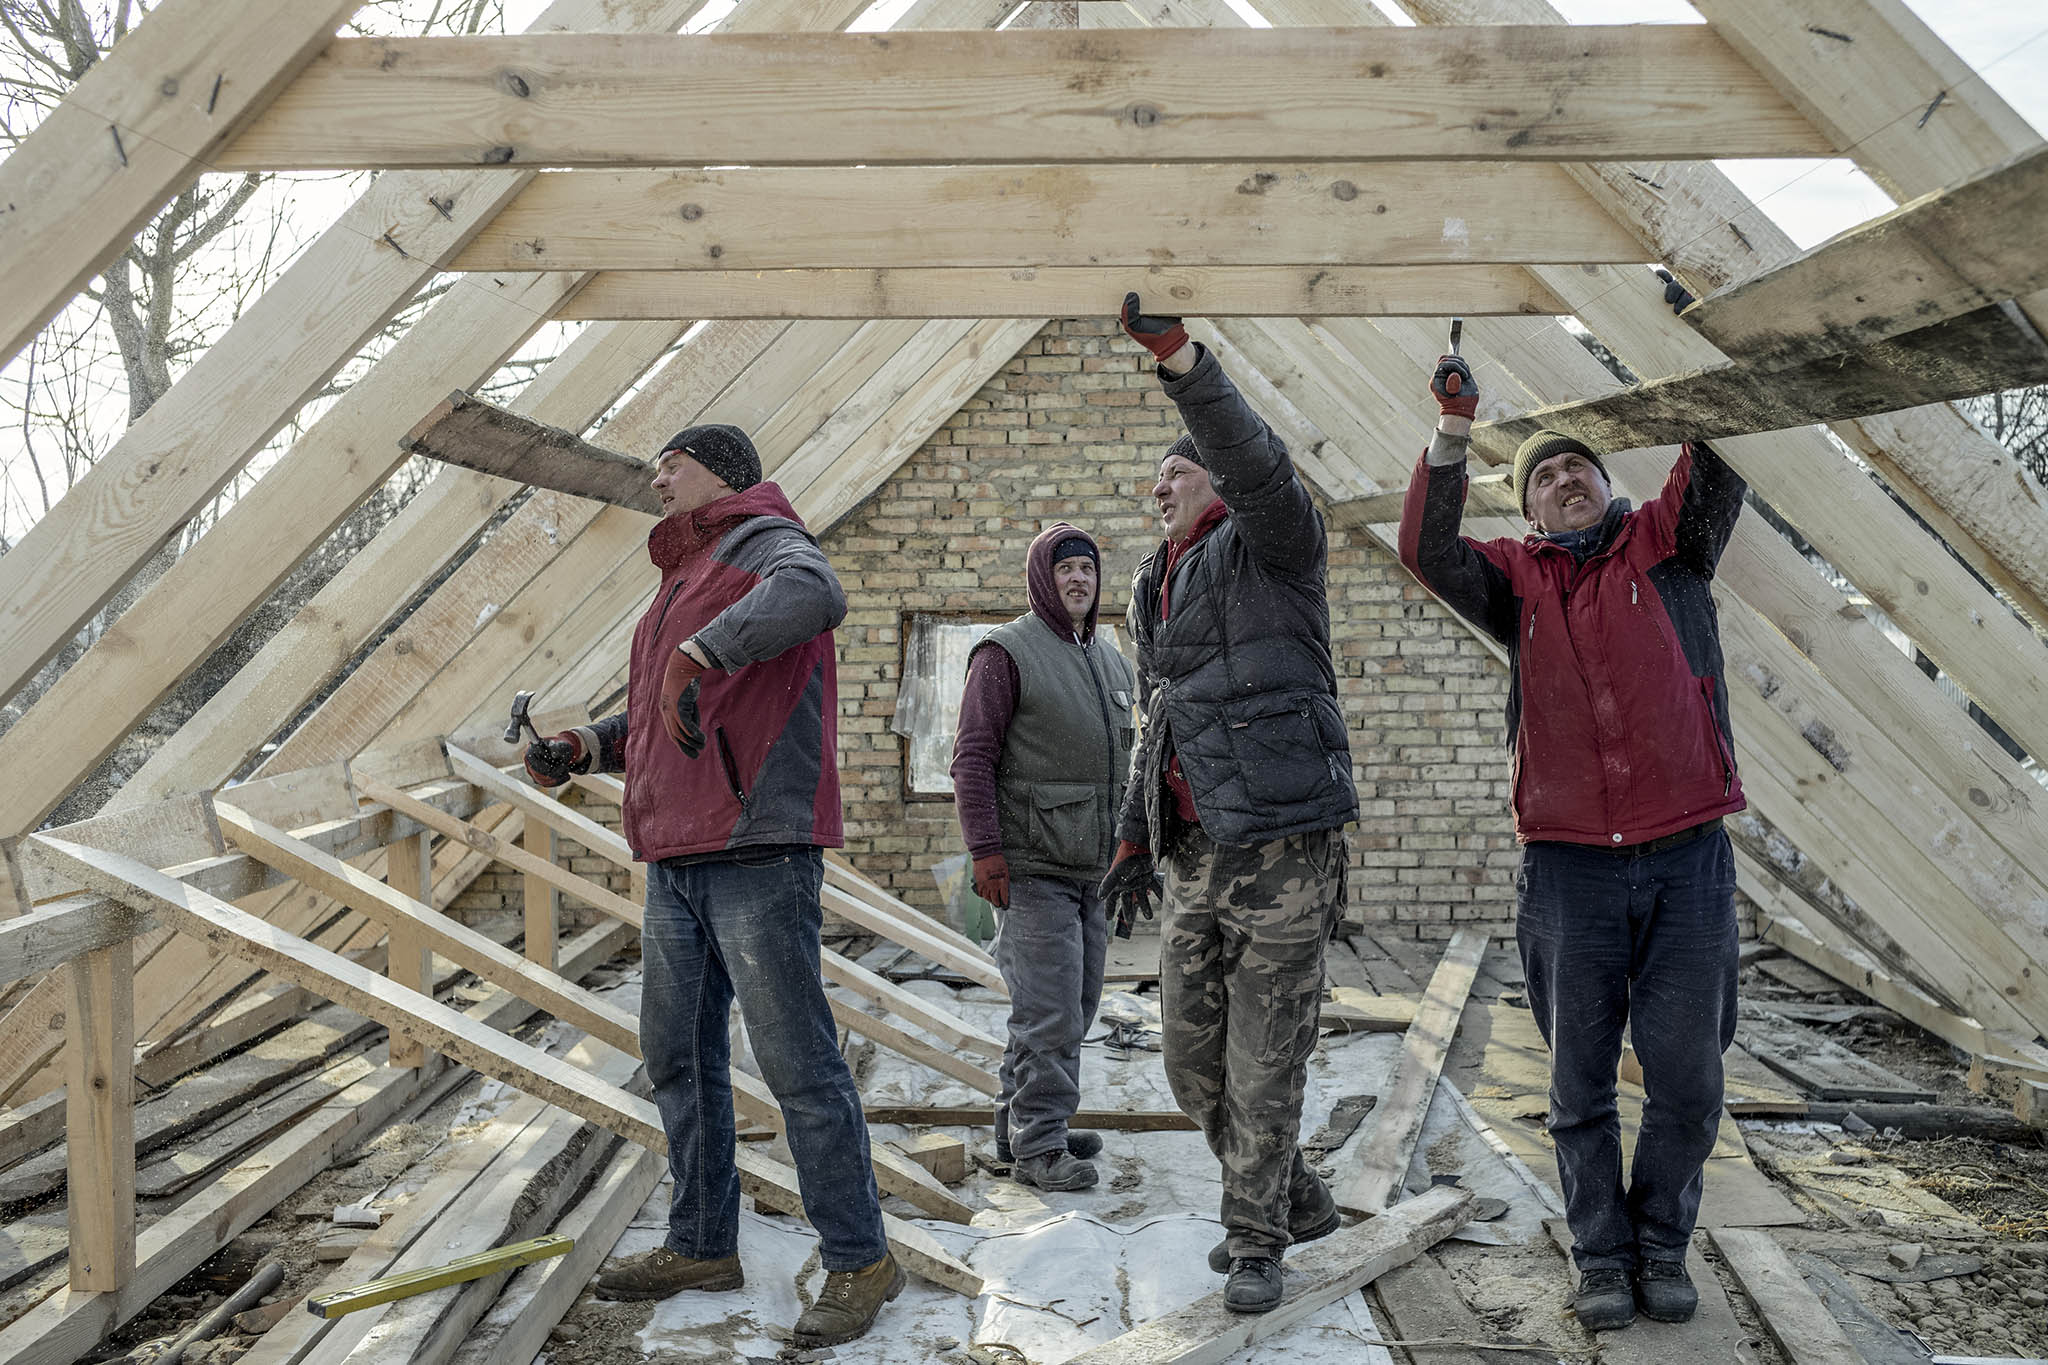 Workers rebuild the roof of a house in the Kyiv suburb of Bucha. February 9, 2023. (Emile Ducke/The New York Times)